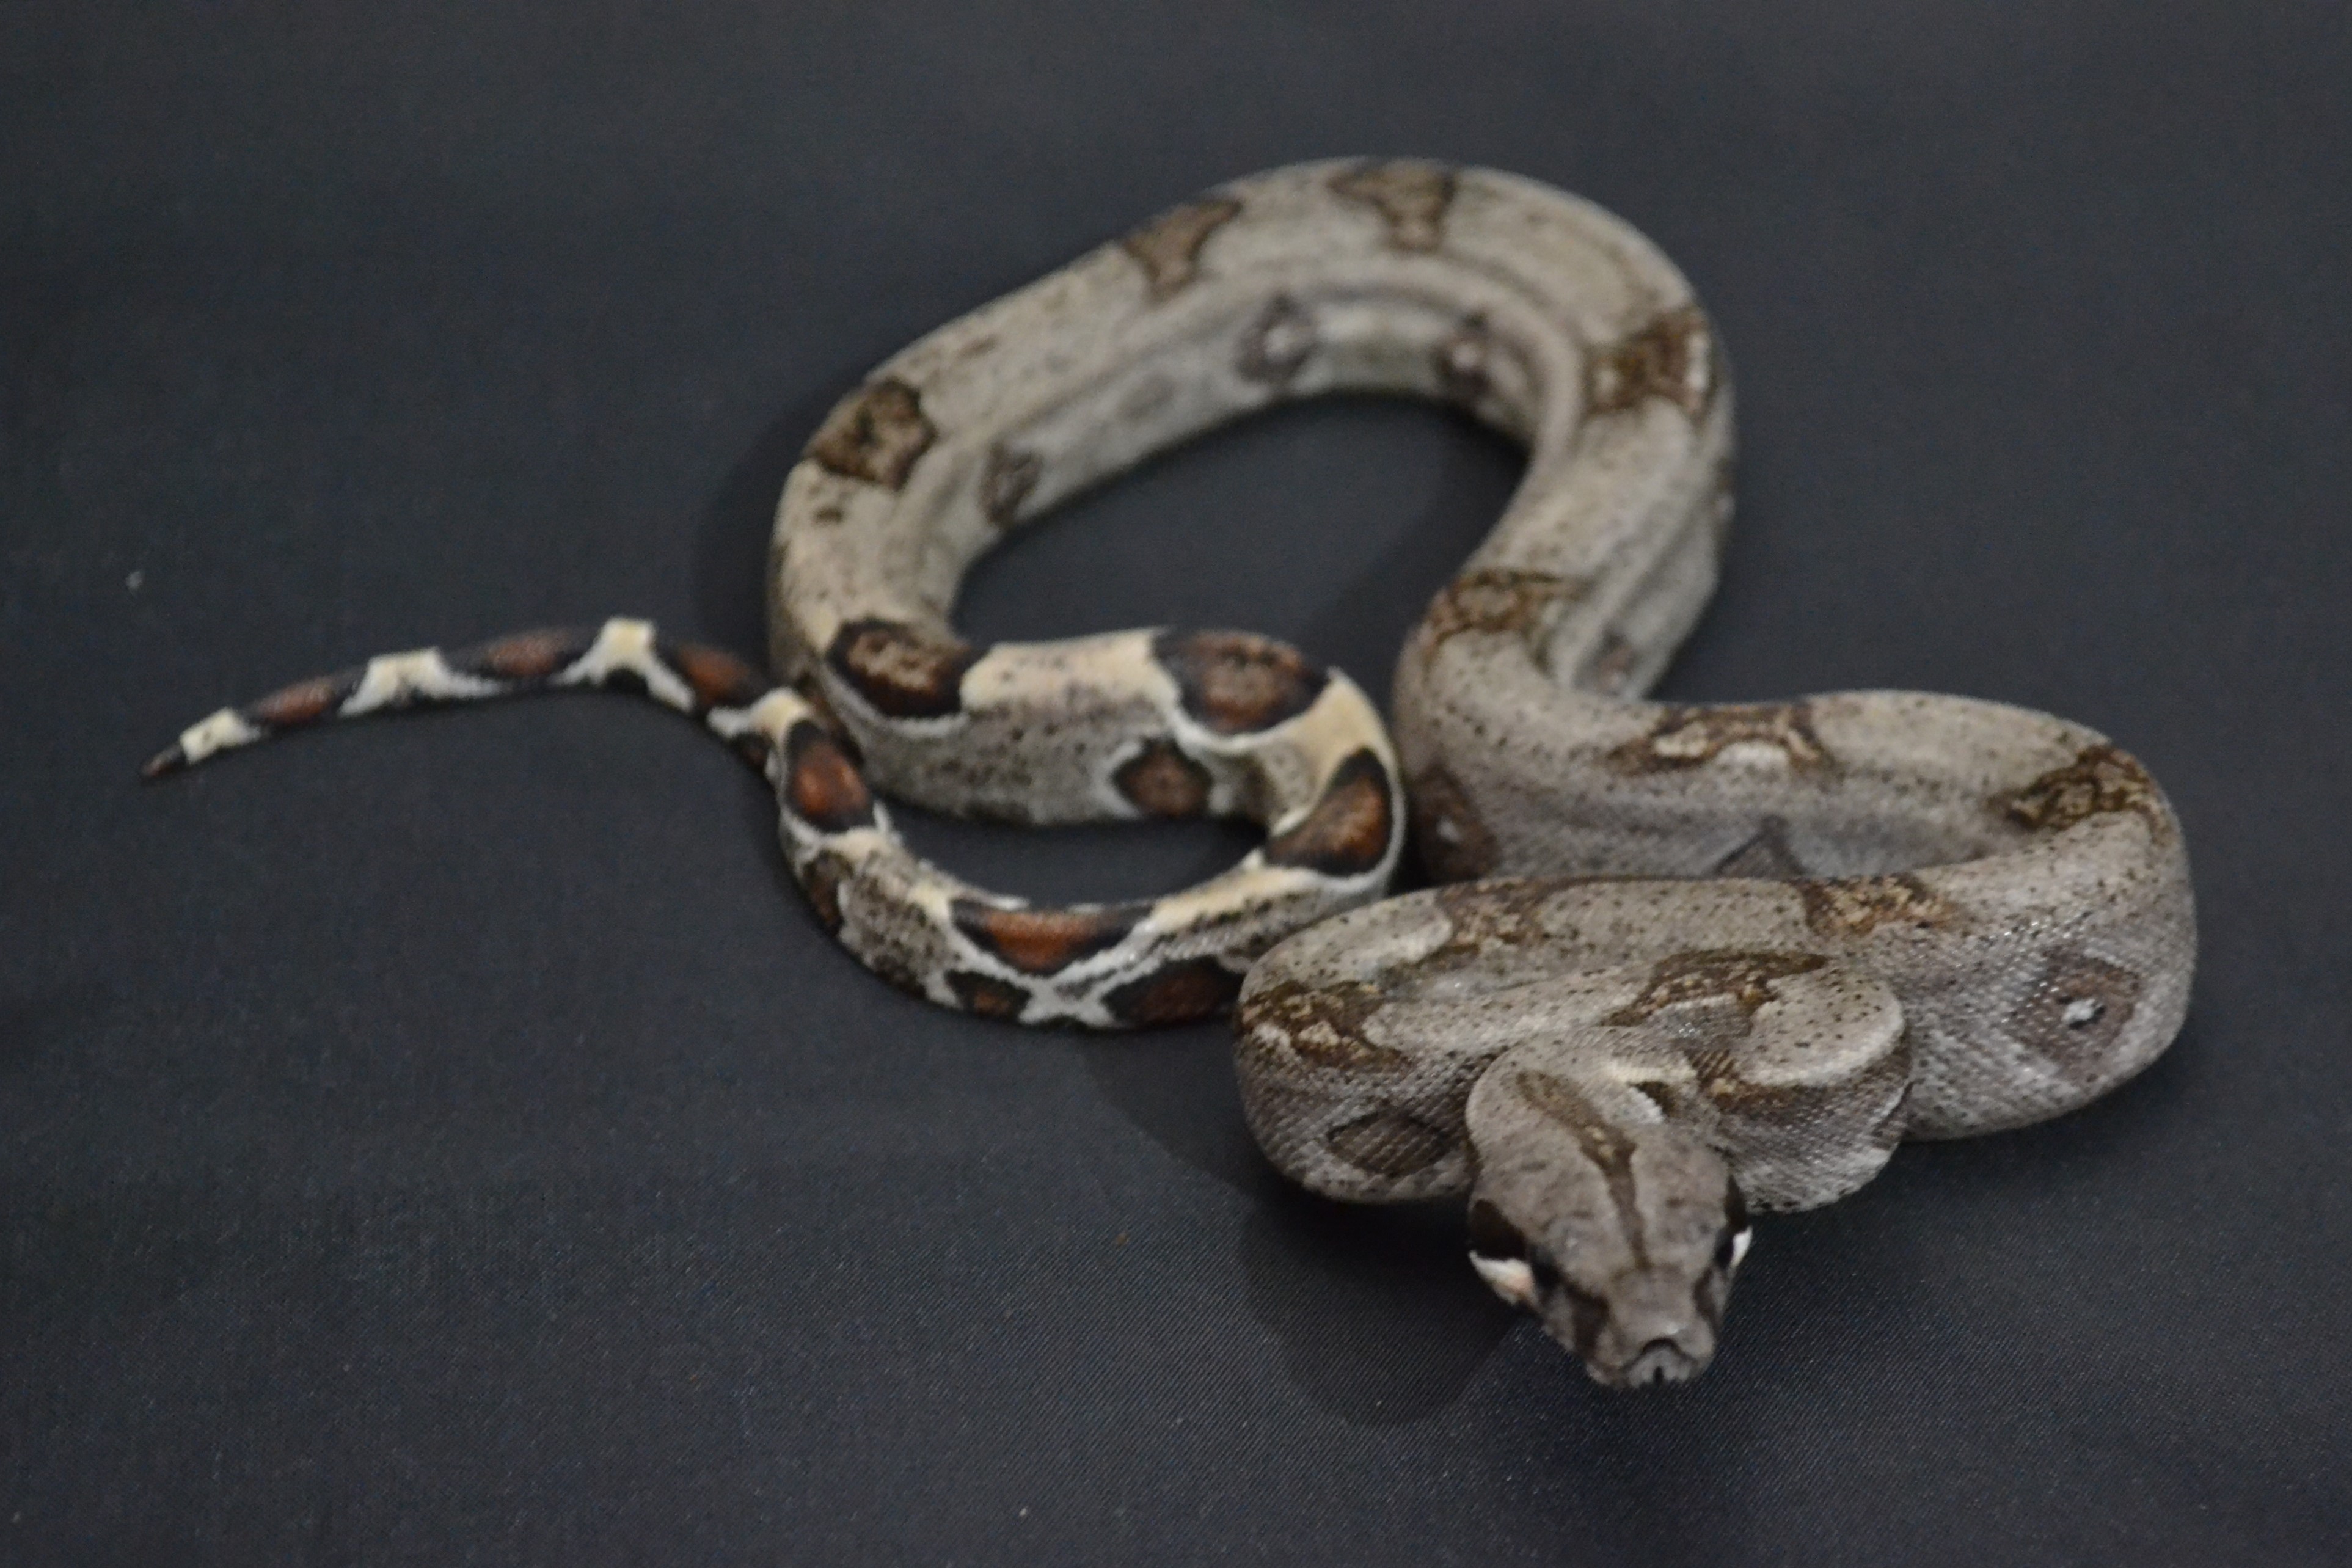 Jungle Boa Constrictor by Redsand Reptiles